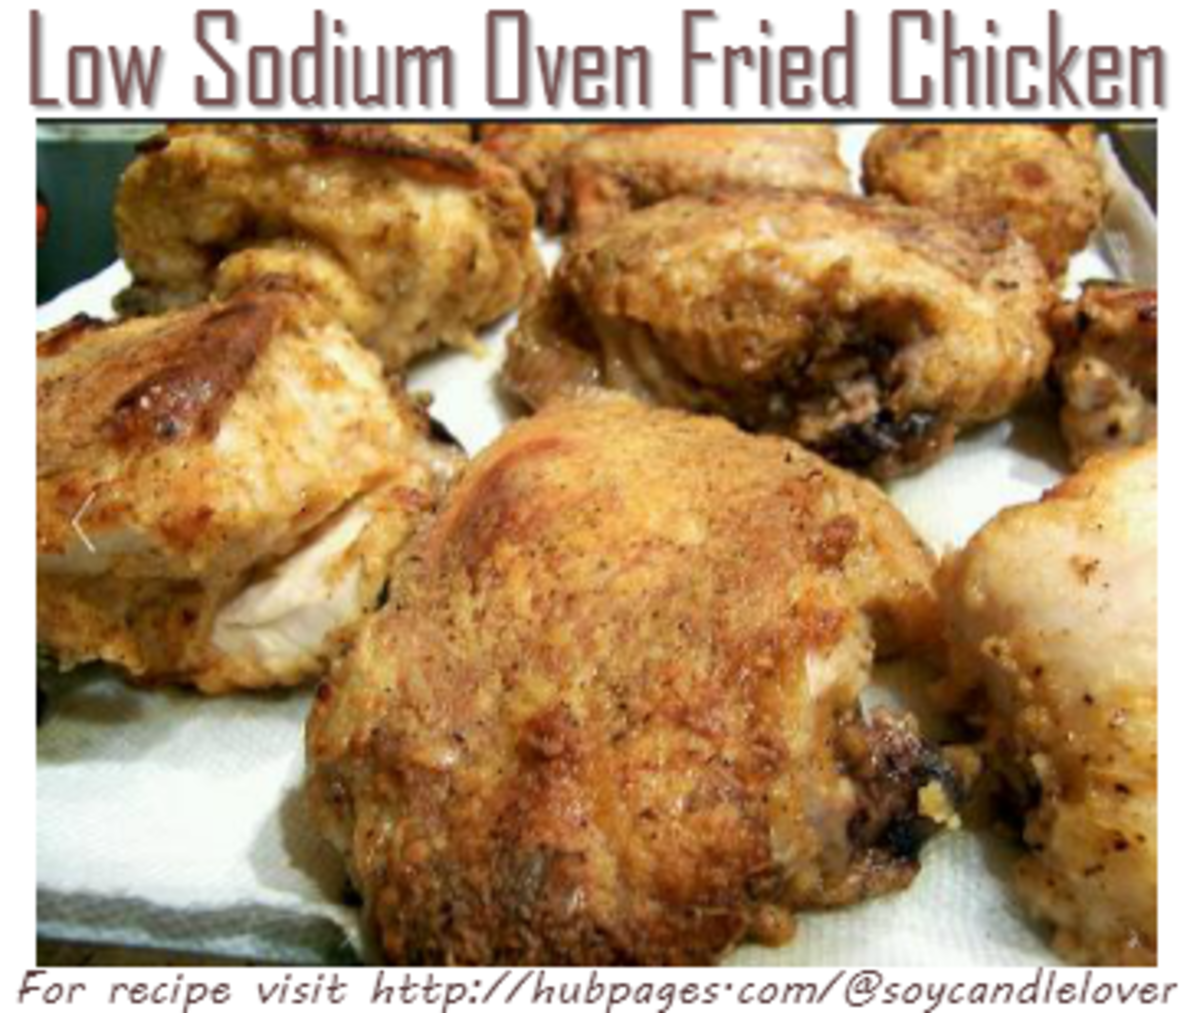 Yummy, tasty, but low-sodium and reduced calorie, Fried Chicken from the oven. 